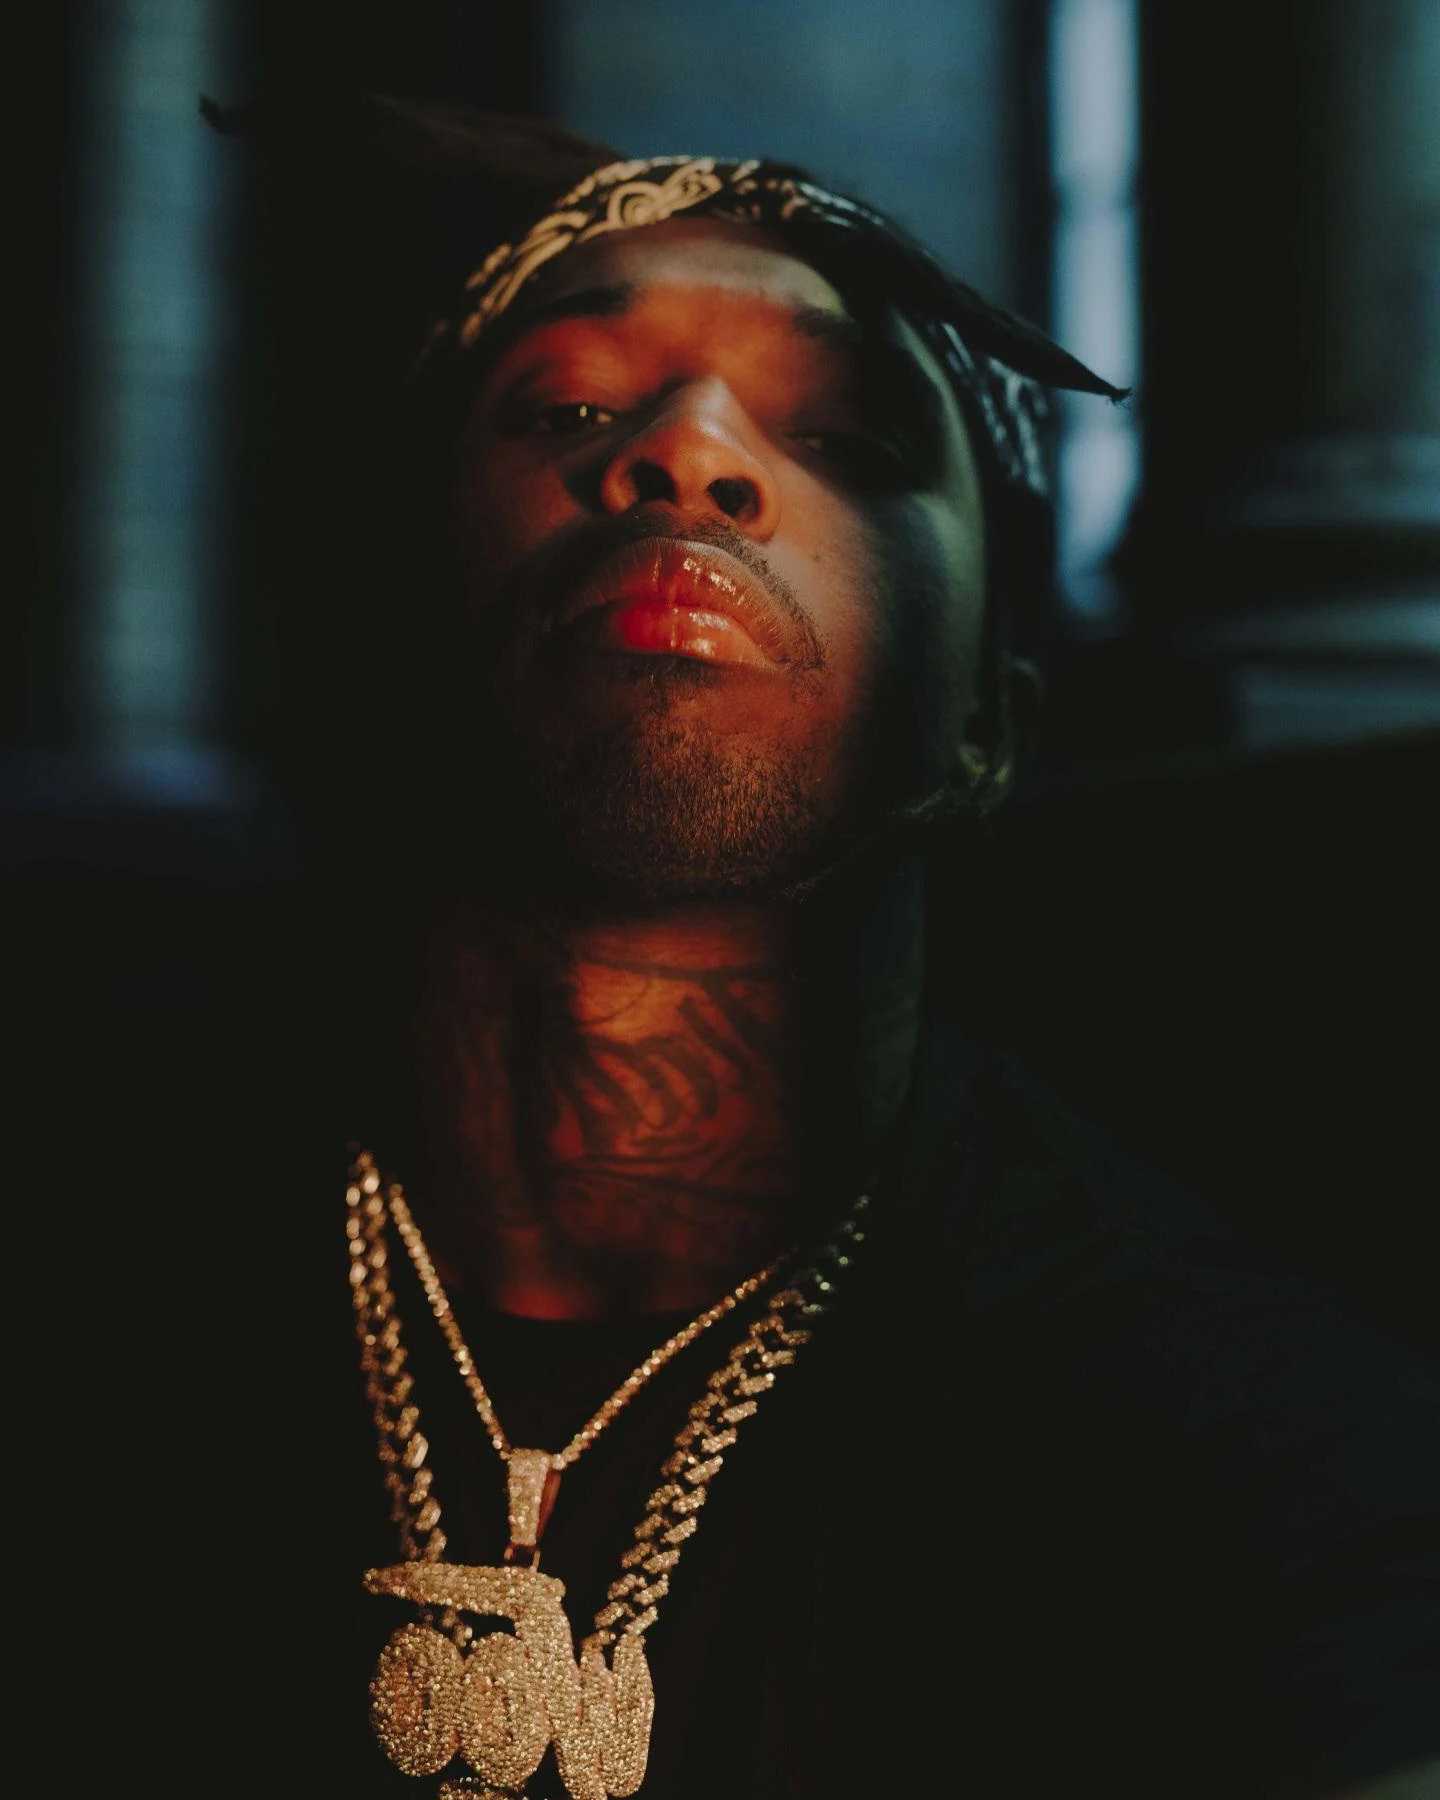 A man wearing gold chains and necklaces - Pop Smoke